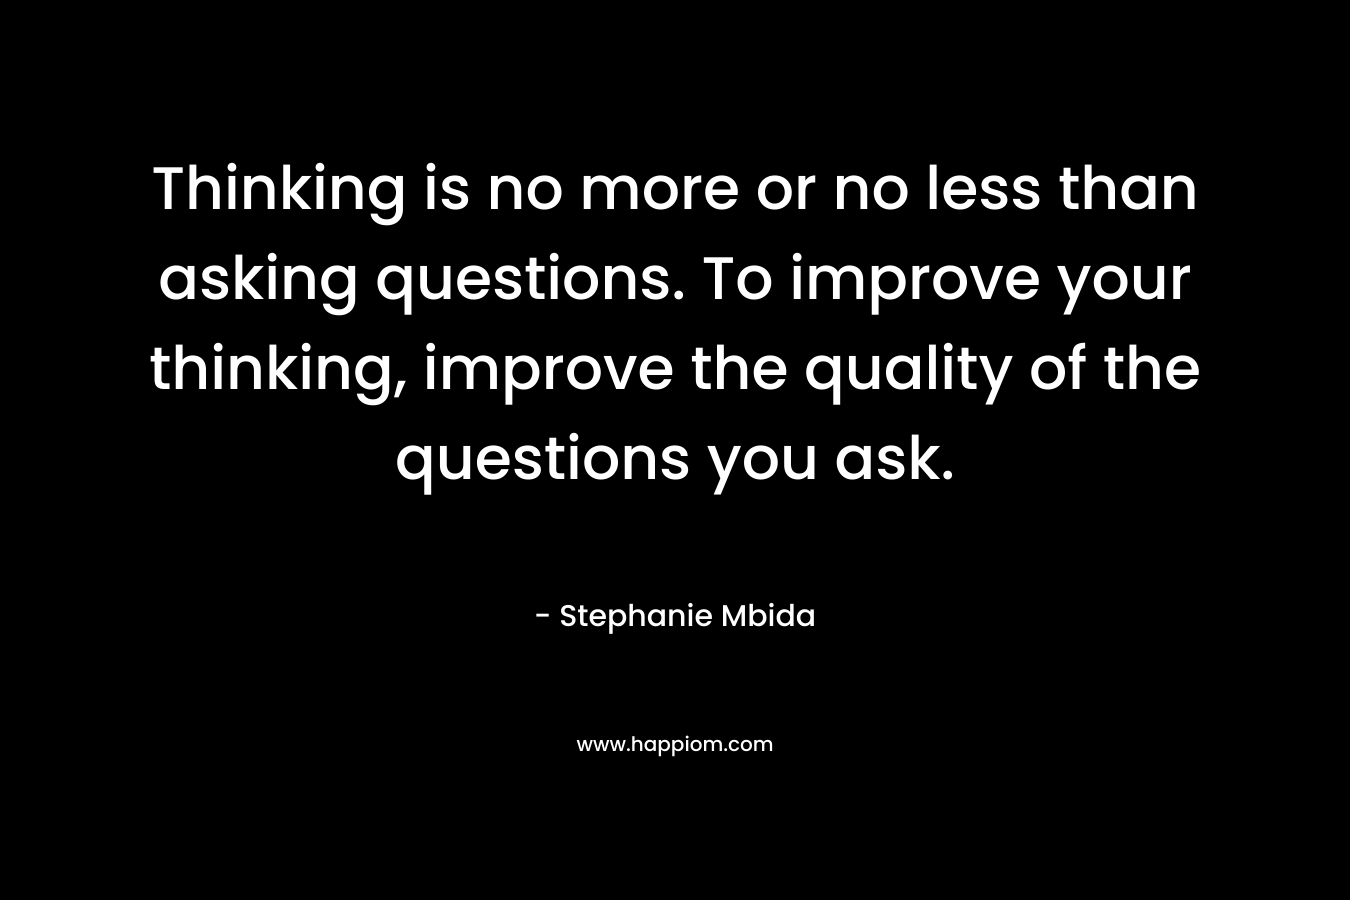 Thinking is no more or no less than asking questions. To improve your thinking, improve the quality of the questions you ask. – Stephanie Mbida